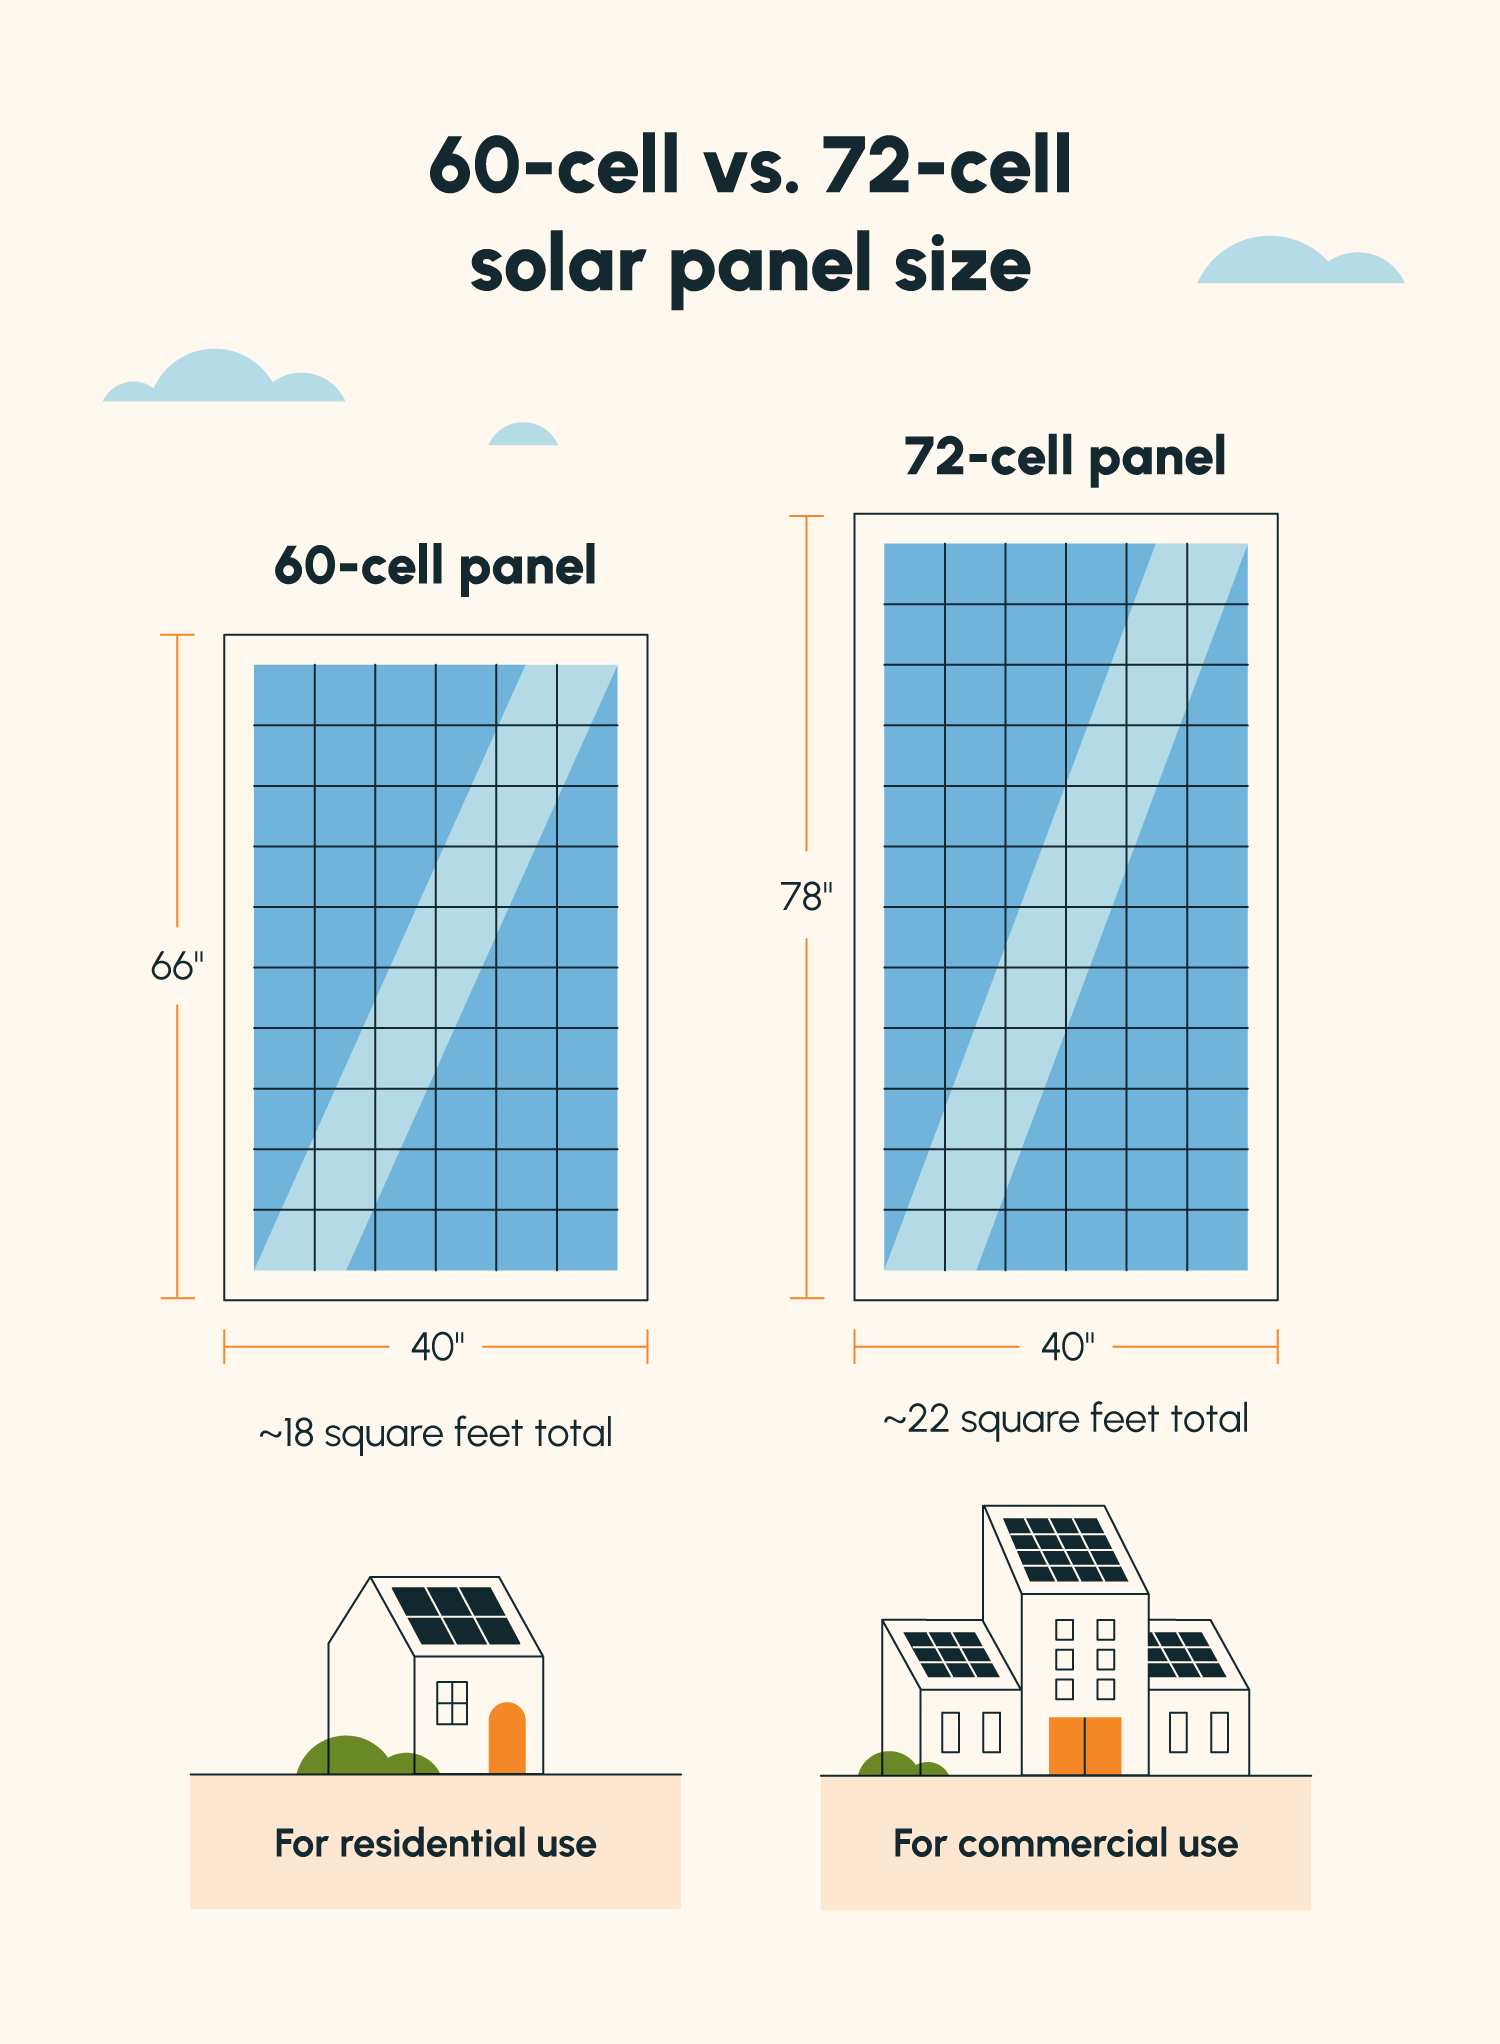 An illustrated comparison of 60-cell and 72-cell solar panel size as well as their common uses